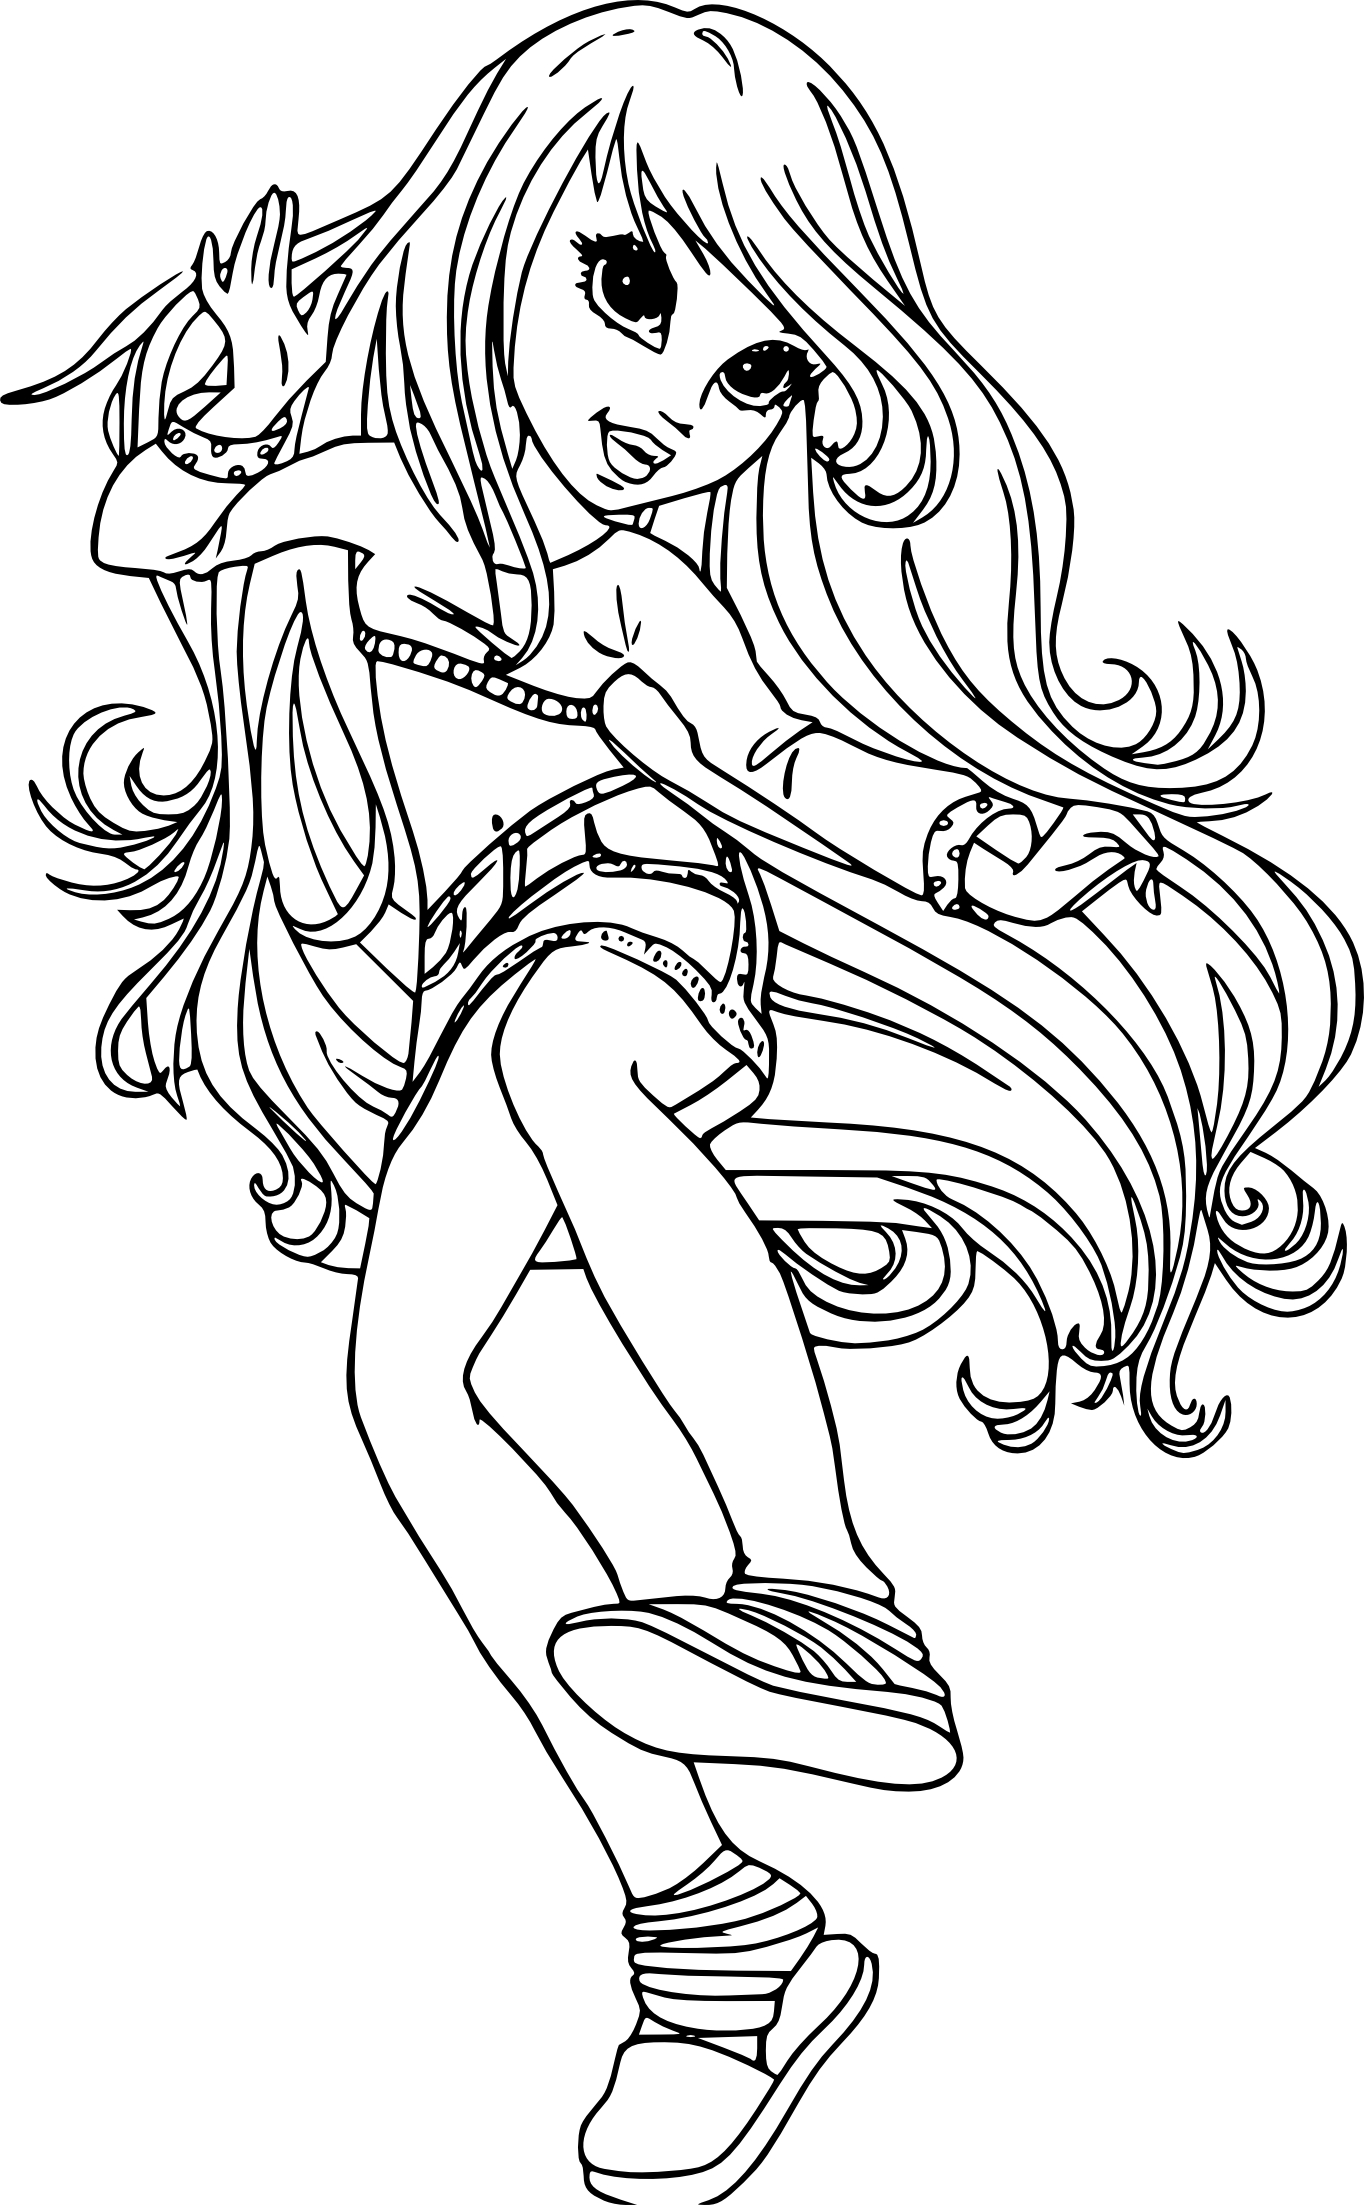 Moxie Girlz coloring page